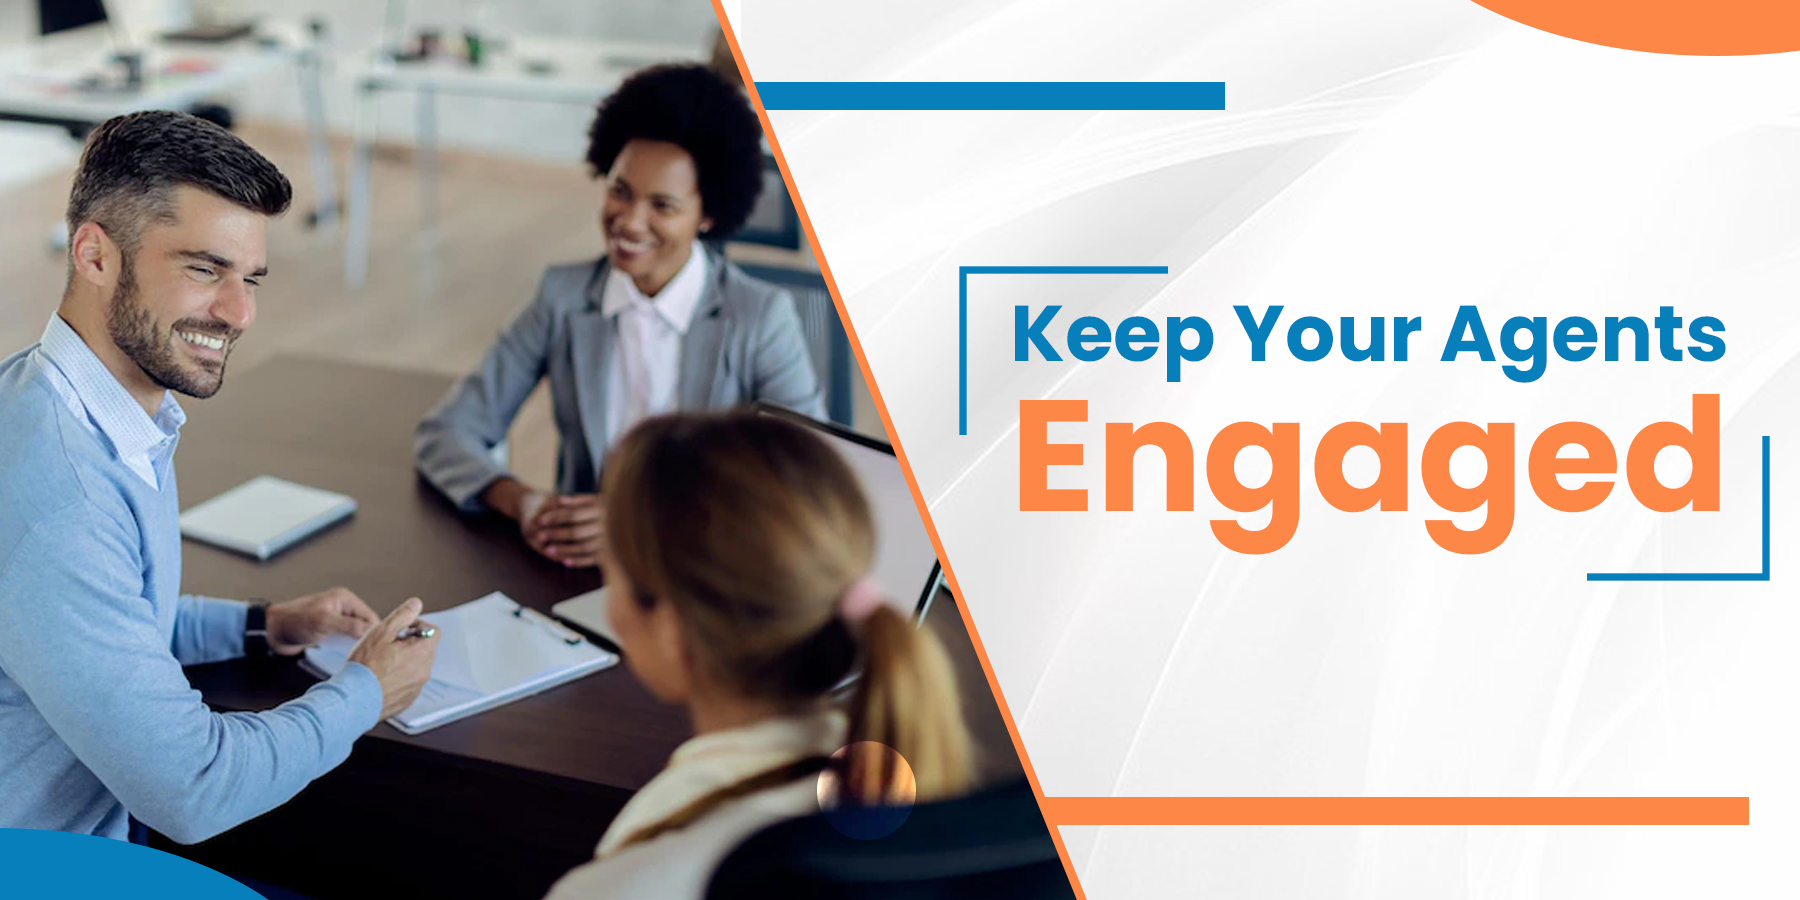 Keep Your Agents Engaged